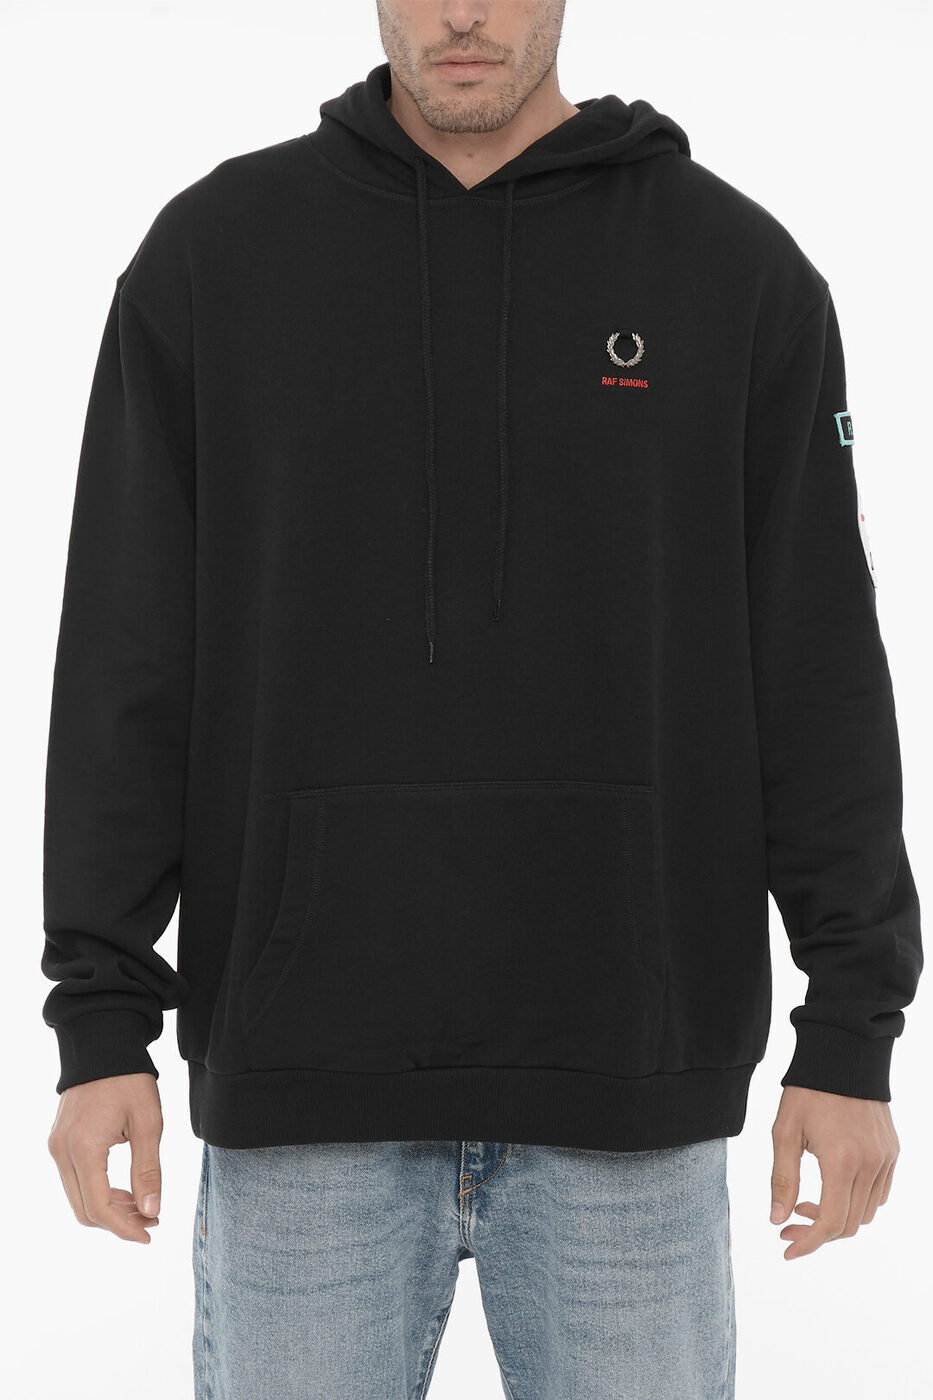 RAF SIMONS ラフ シモンズ トレーナー SM4213-45CO 102 メンズ FRED PERRY COTTON HOODIE WITH LOGO-APPLICATION 【関税 送料無料】【ラッピング無料】 dk